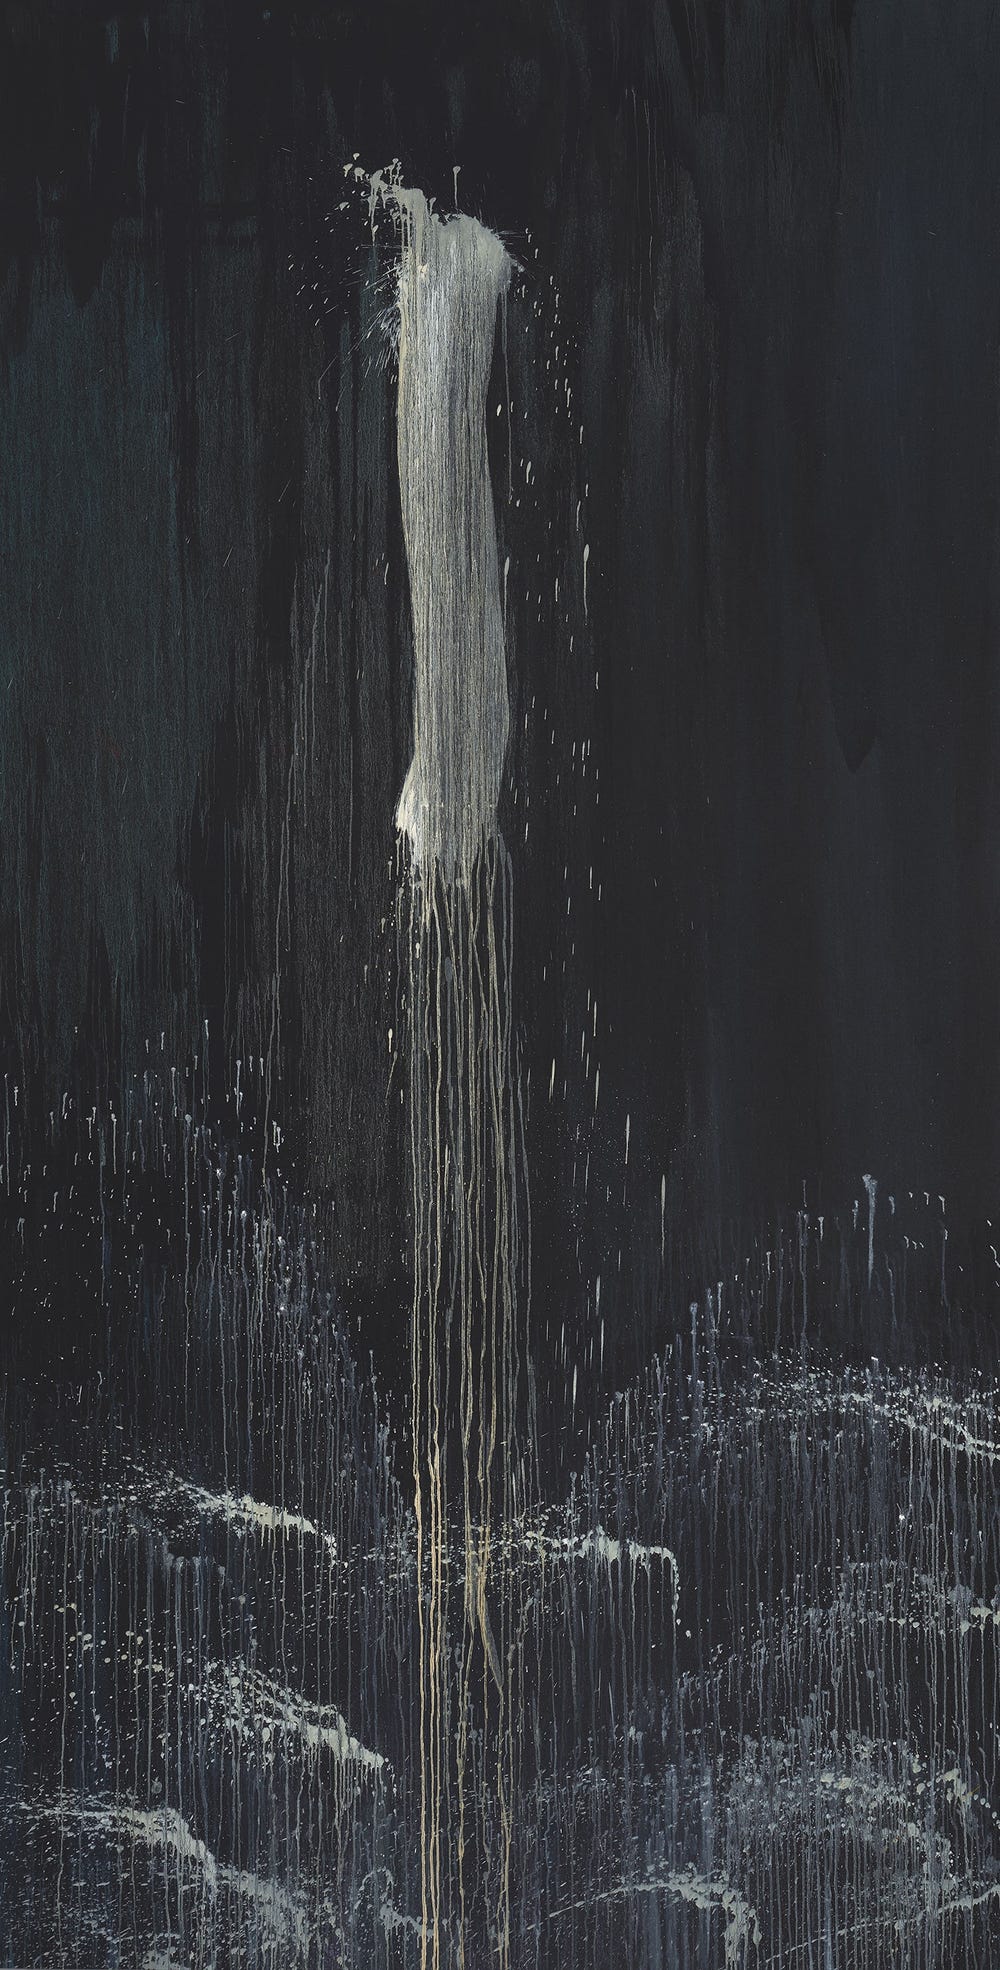 white paint on a black canvas giving the impression of a waterfall